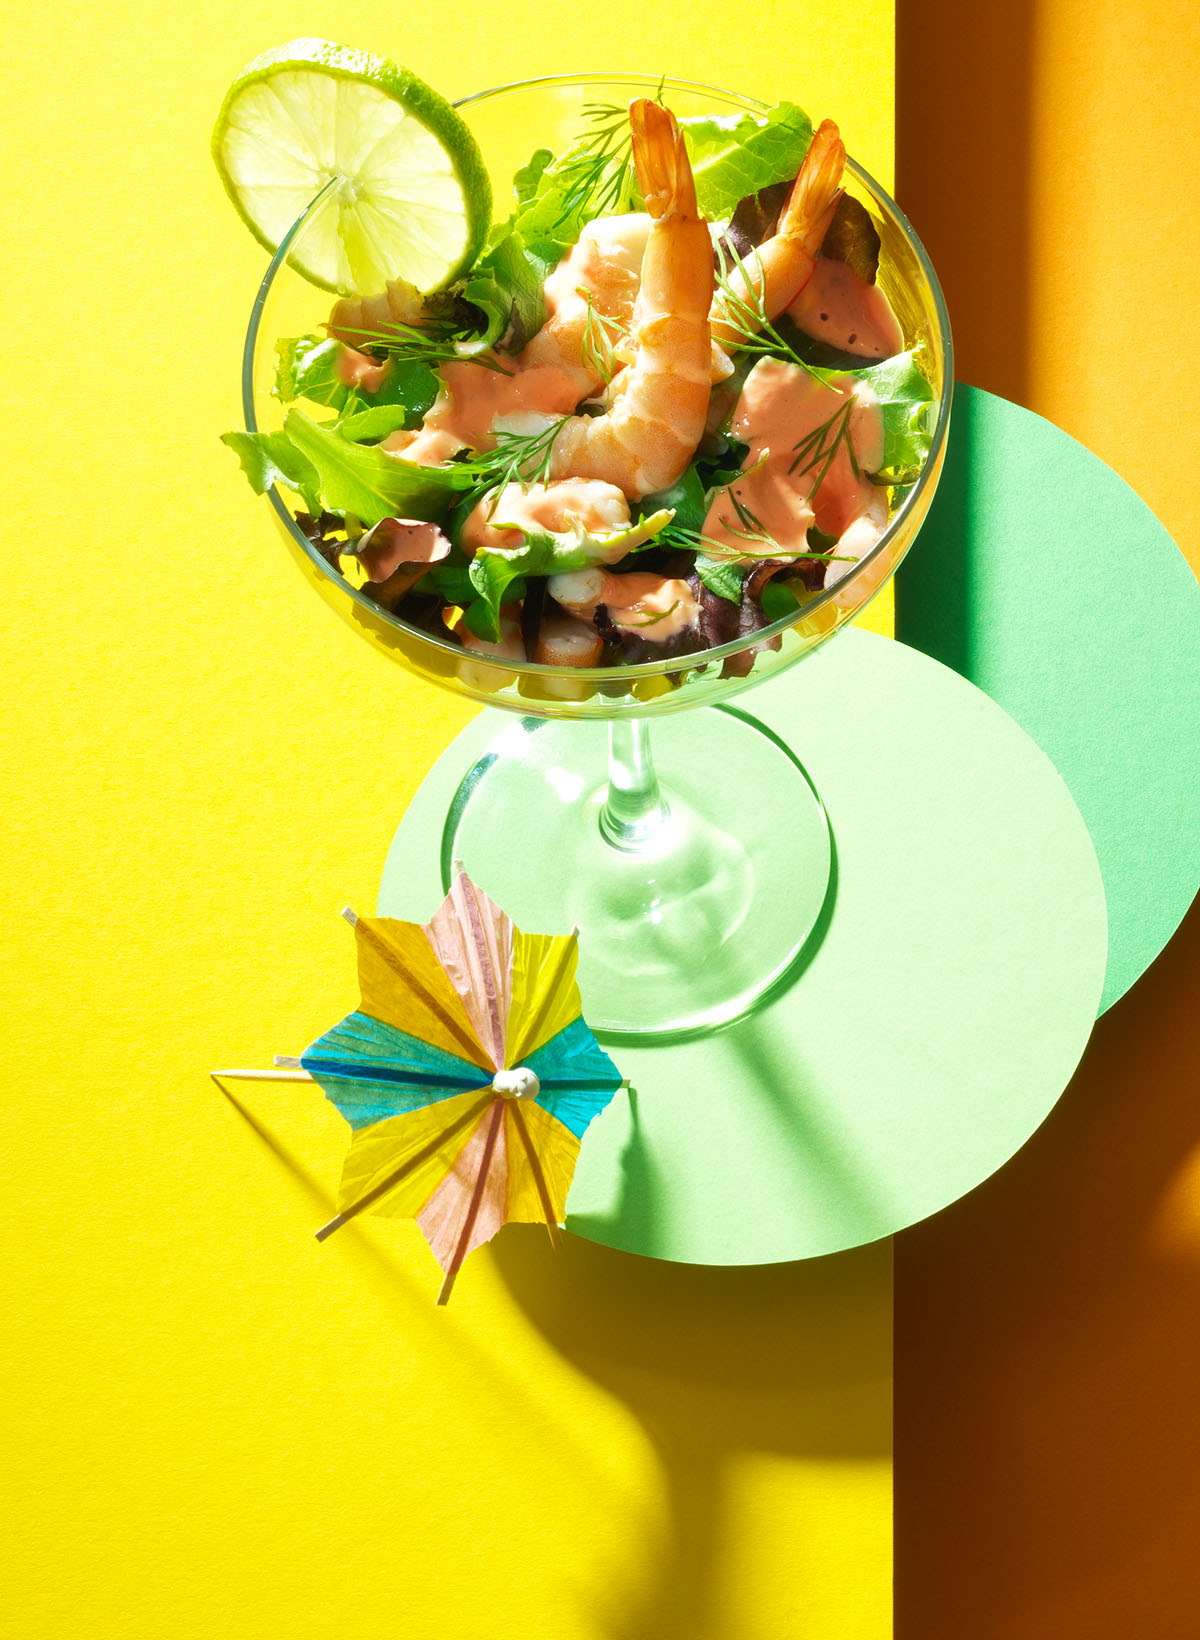 Food photography styling of a cocktail with shrimp and vegetables made by Studio_m Amsterdam